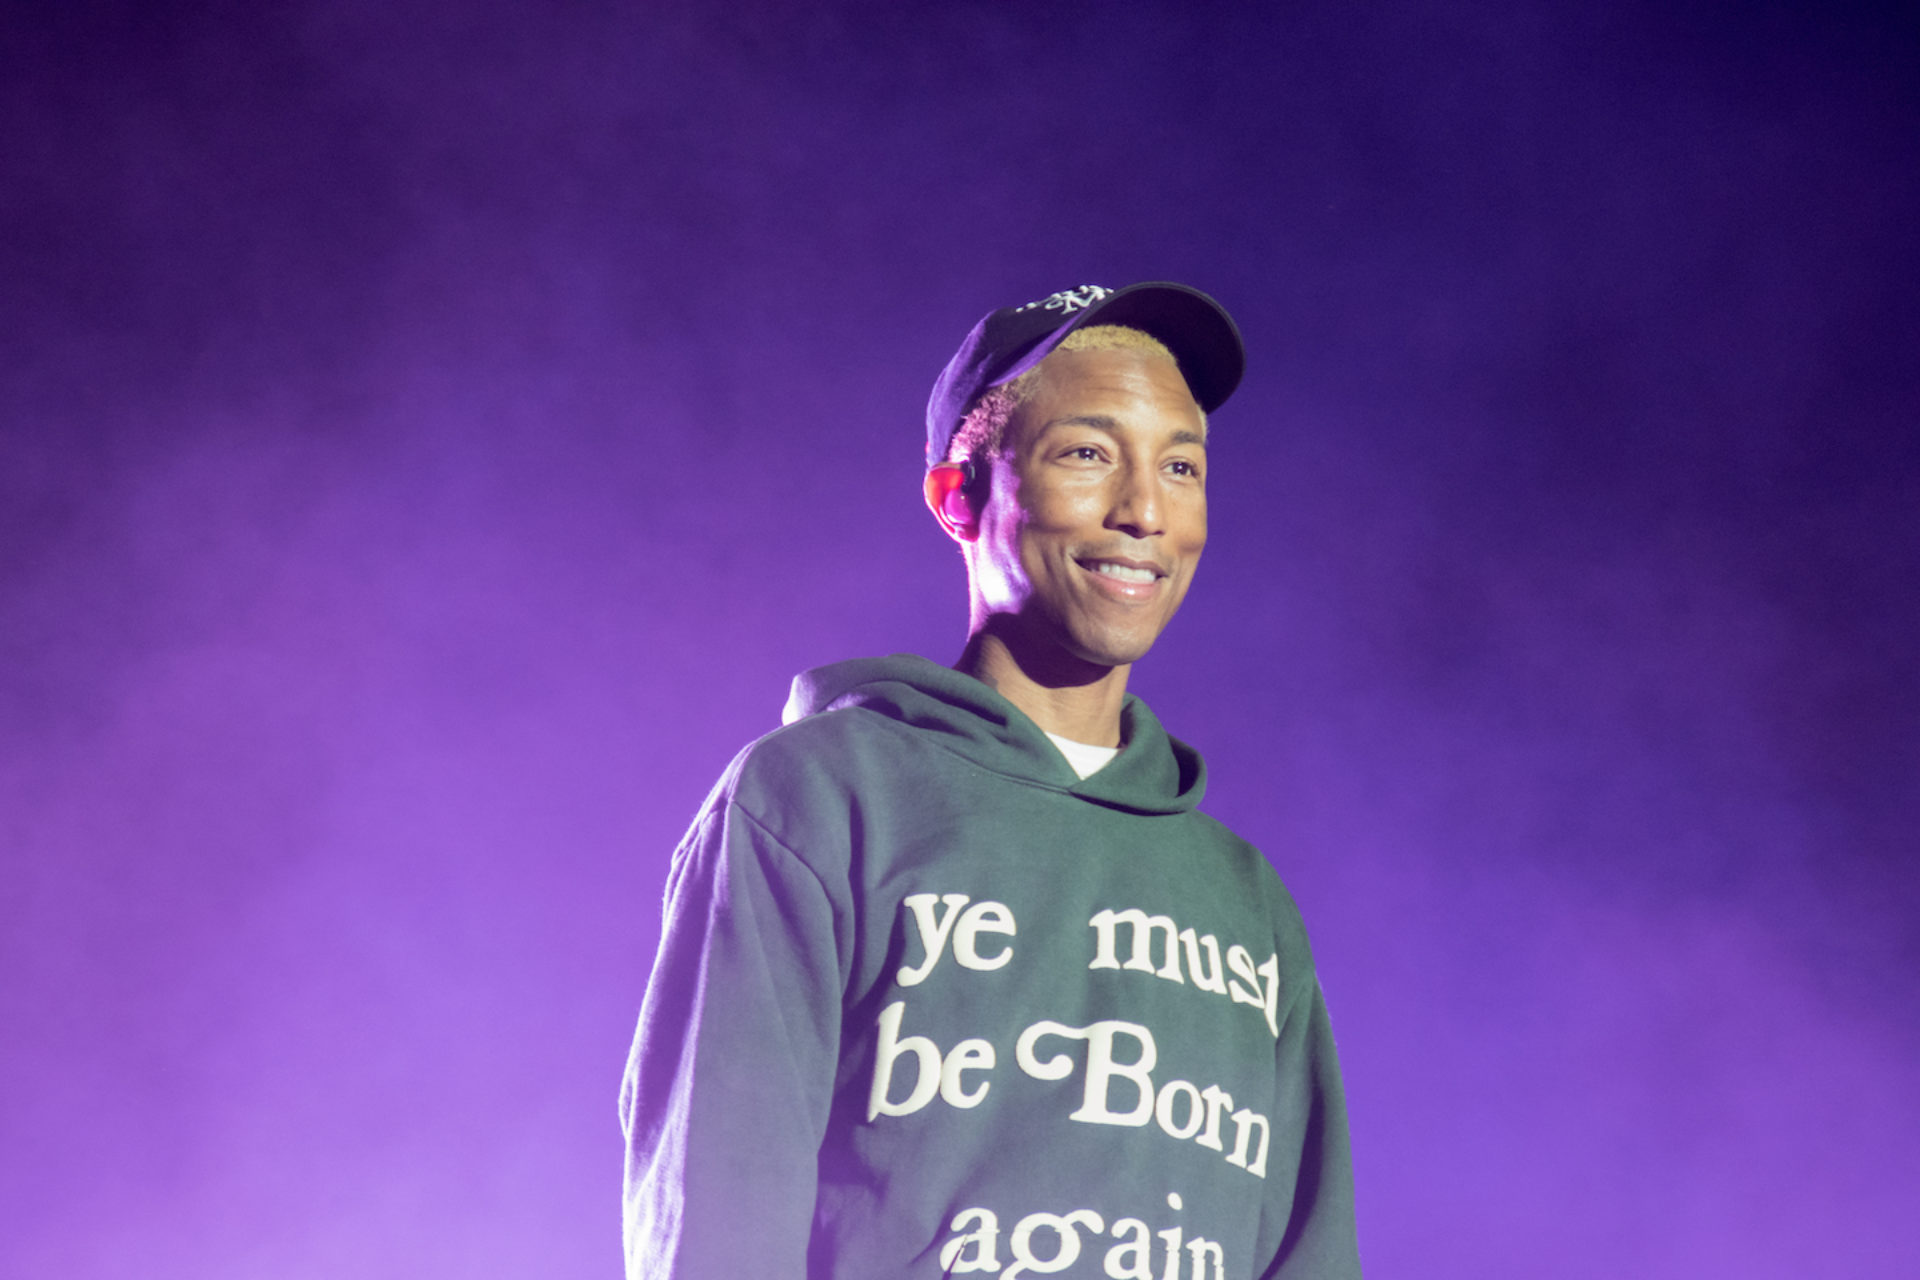 Pharrell Appointed Virgil Abloh's Successor At Louis Vuitton